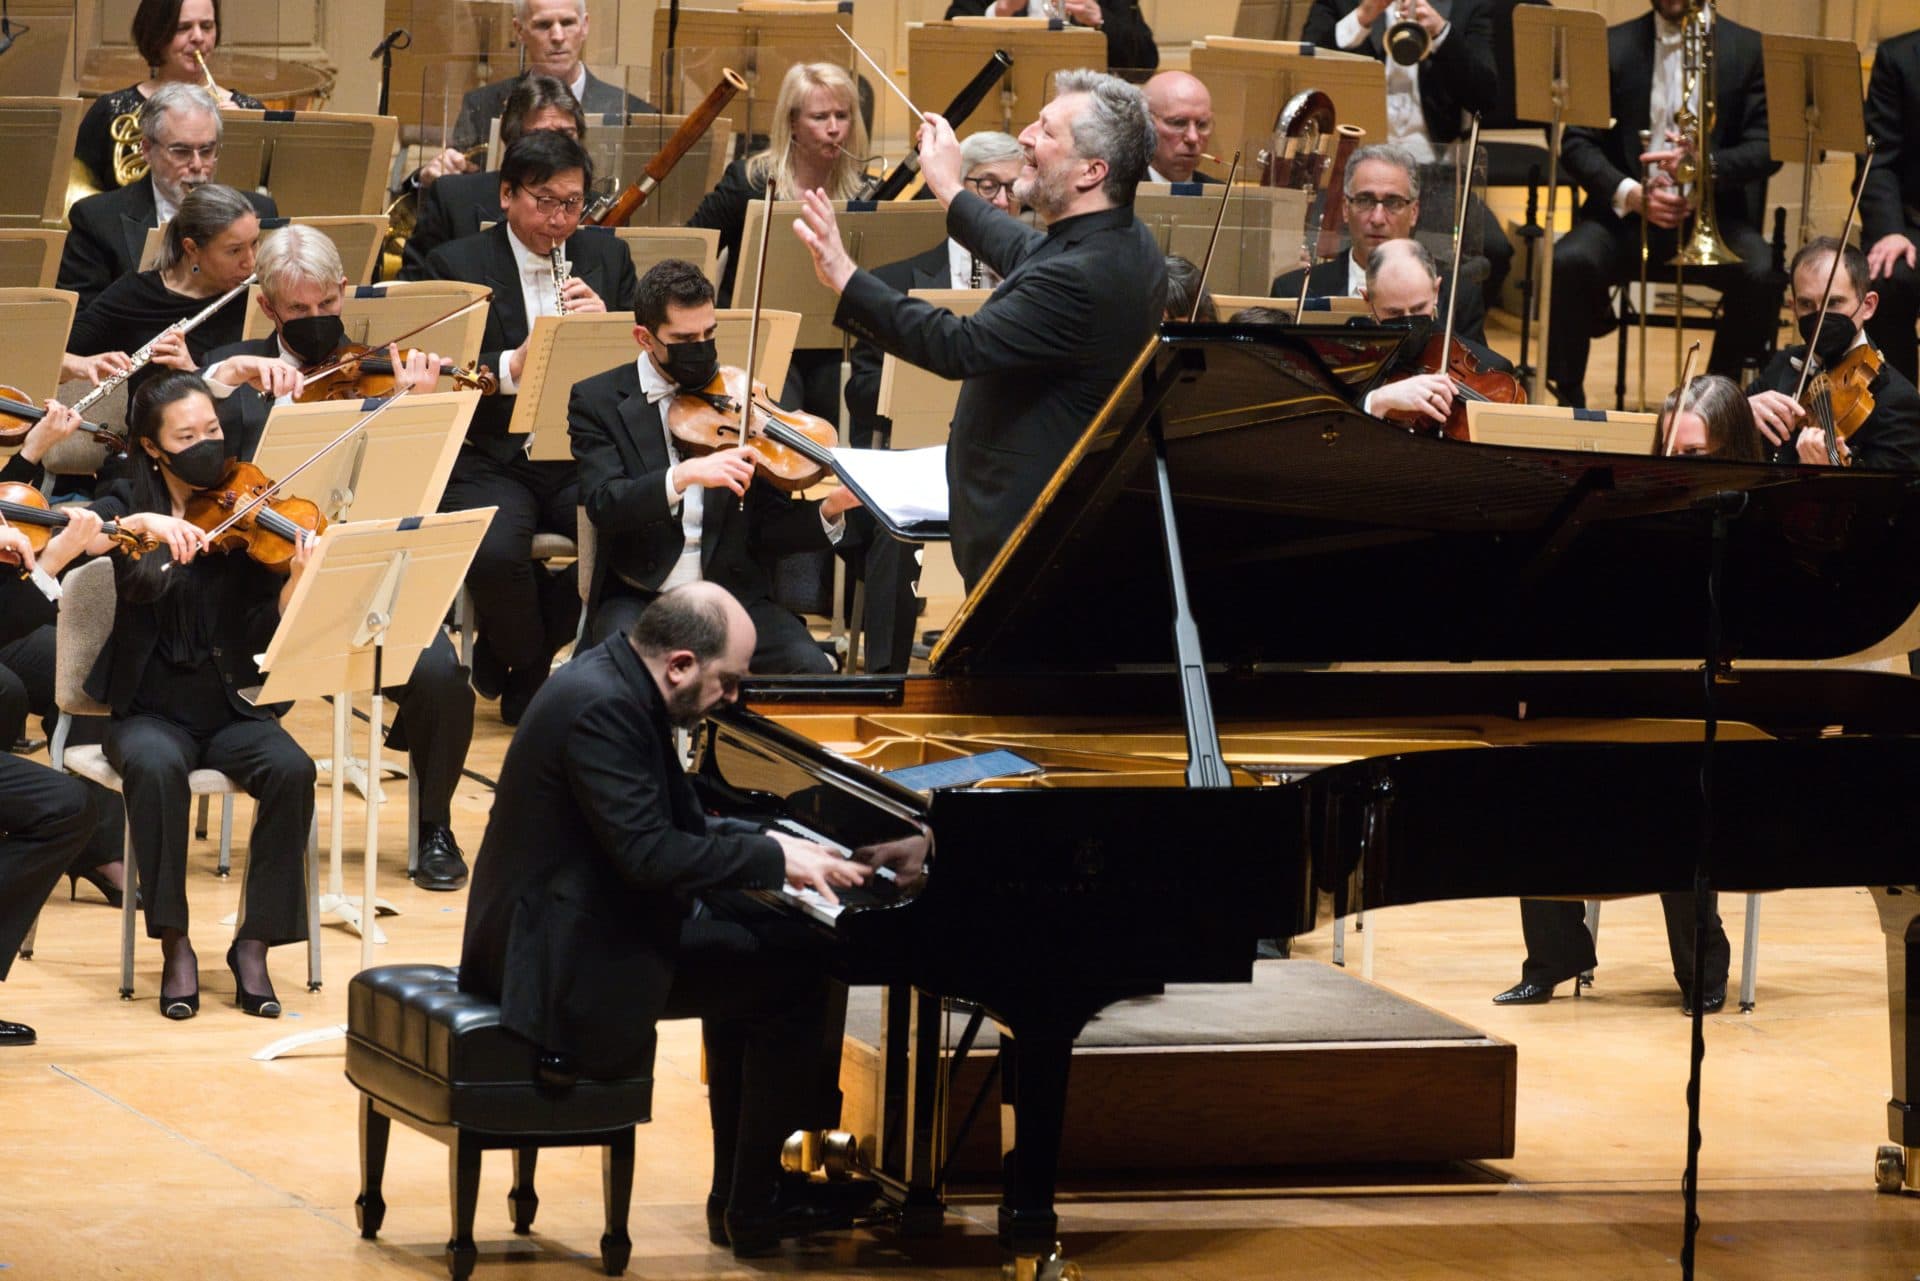 Pianist Kirill Gerstein and Thomas Adès perform Adès' Concerto for Piano and Orchestra. (Courtesy Hilary Scott)